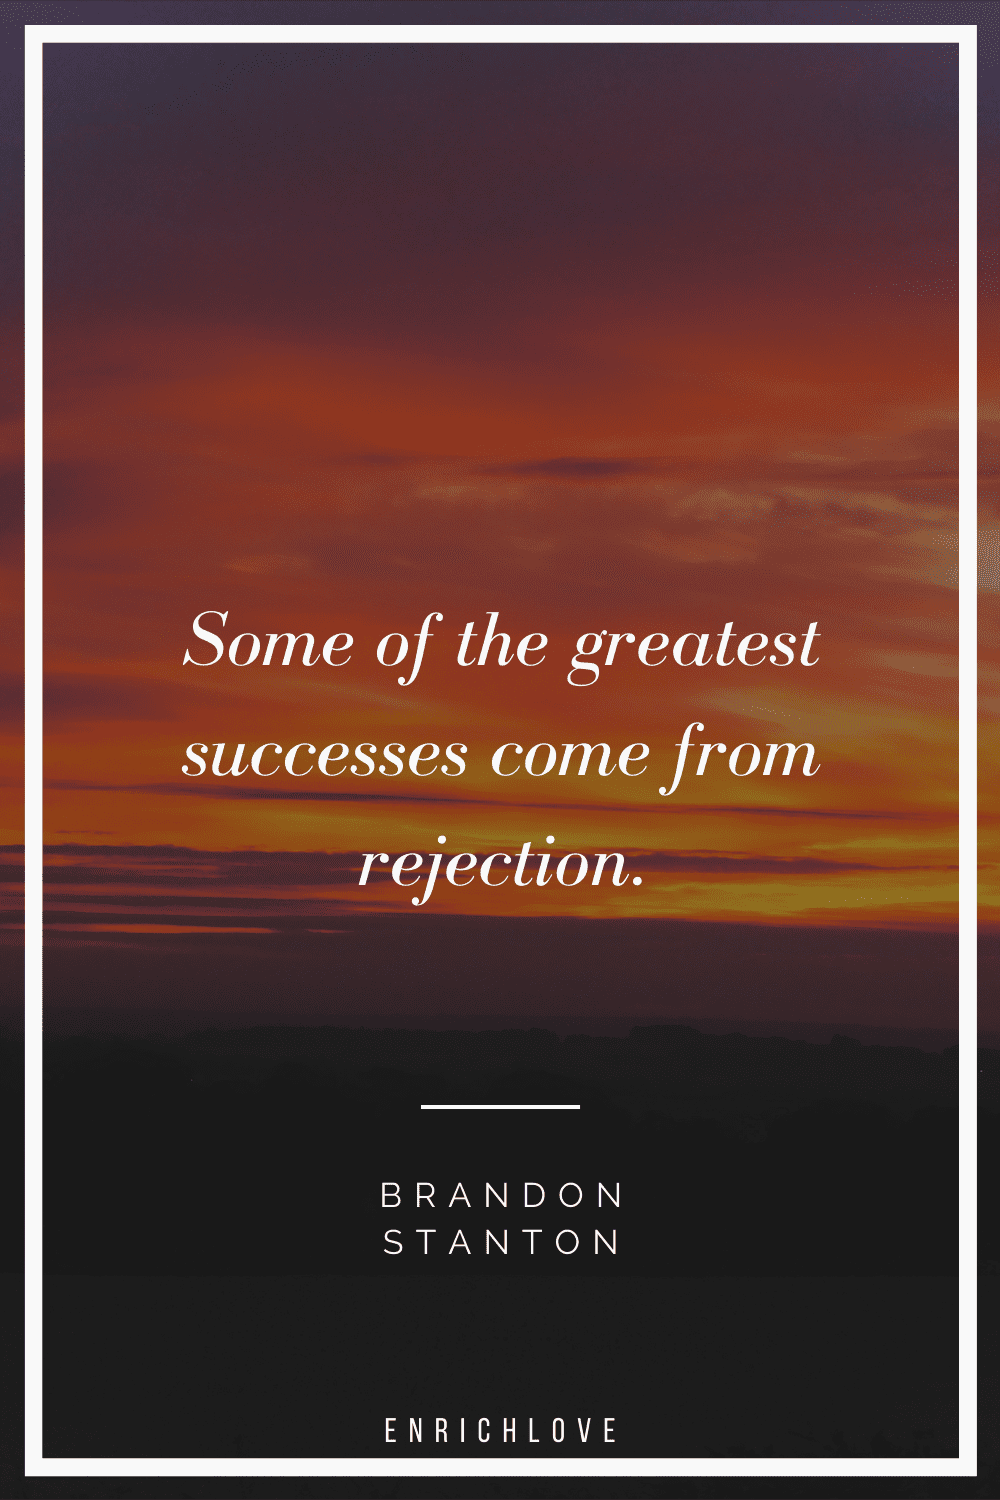 Some of the greatest successes come from rejection.